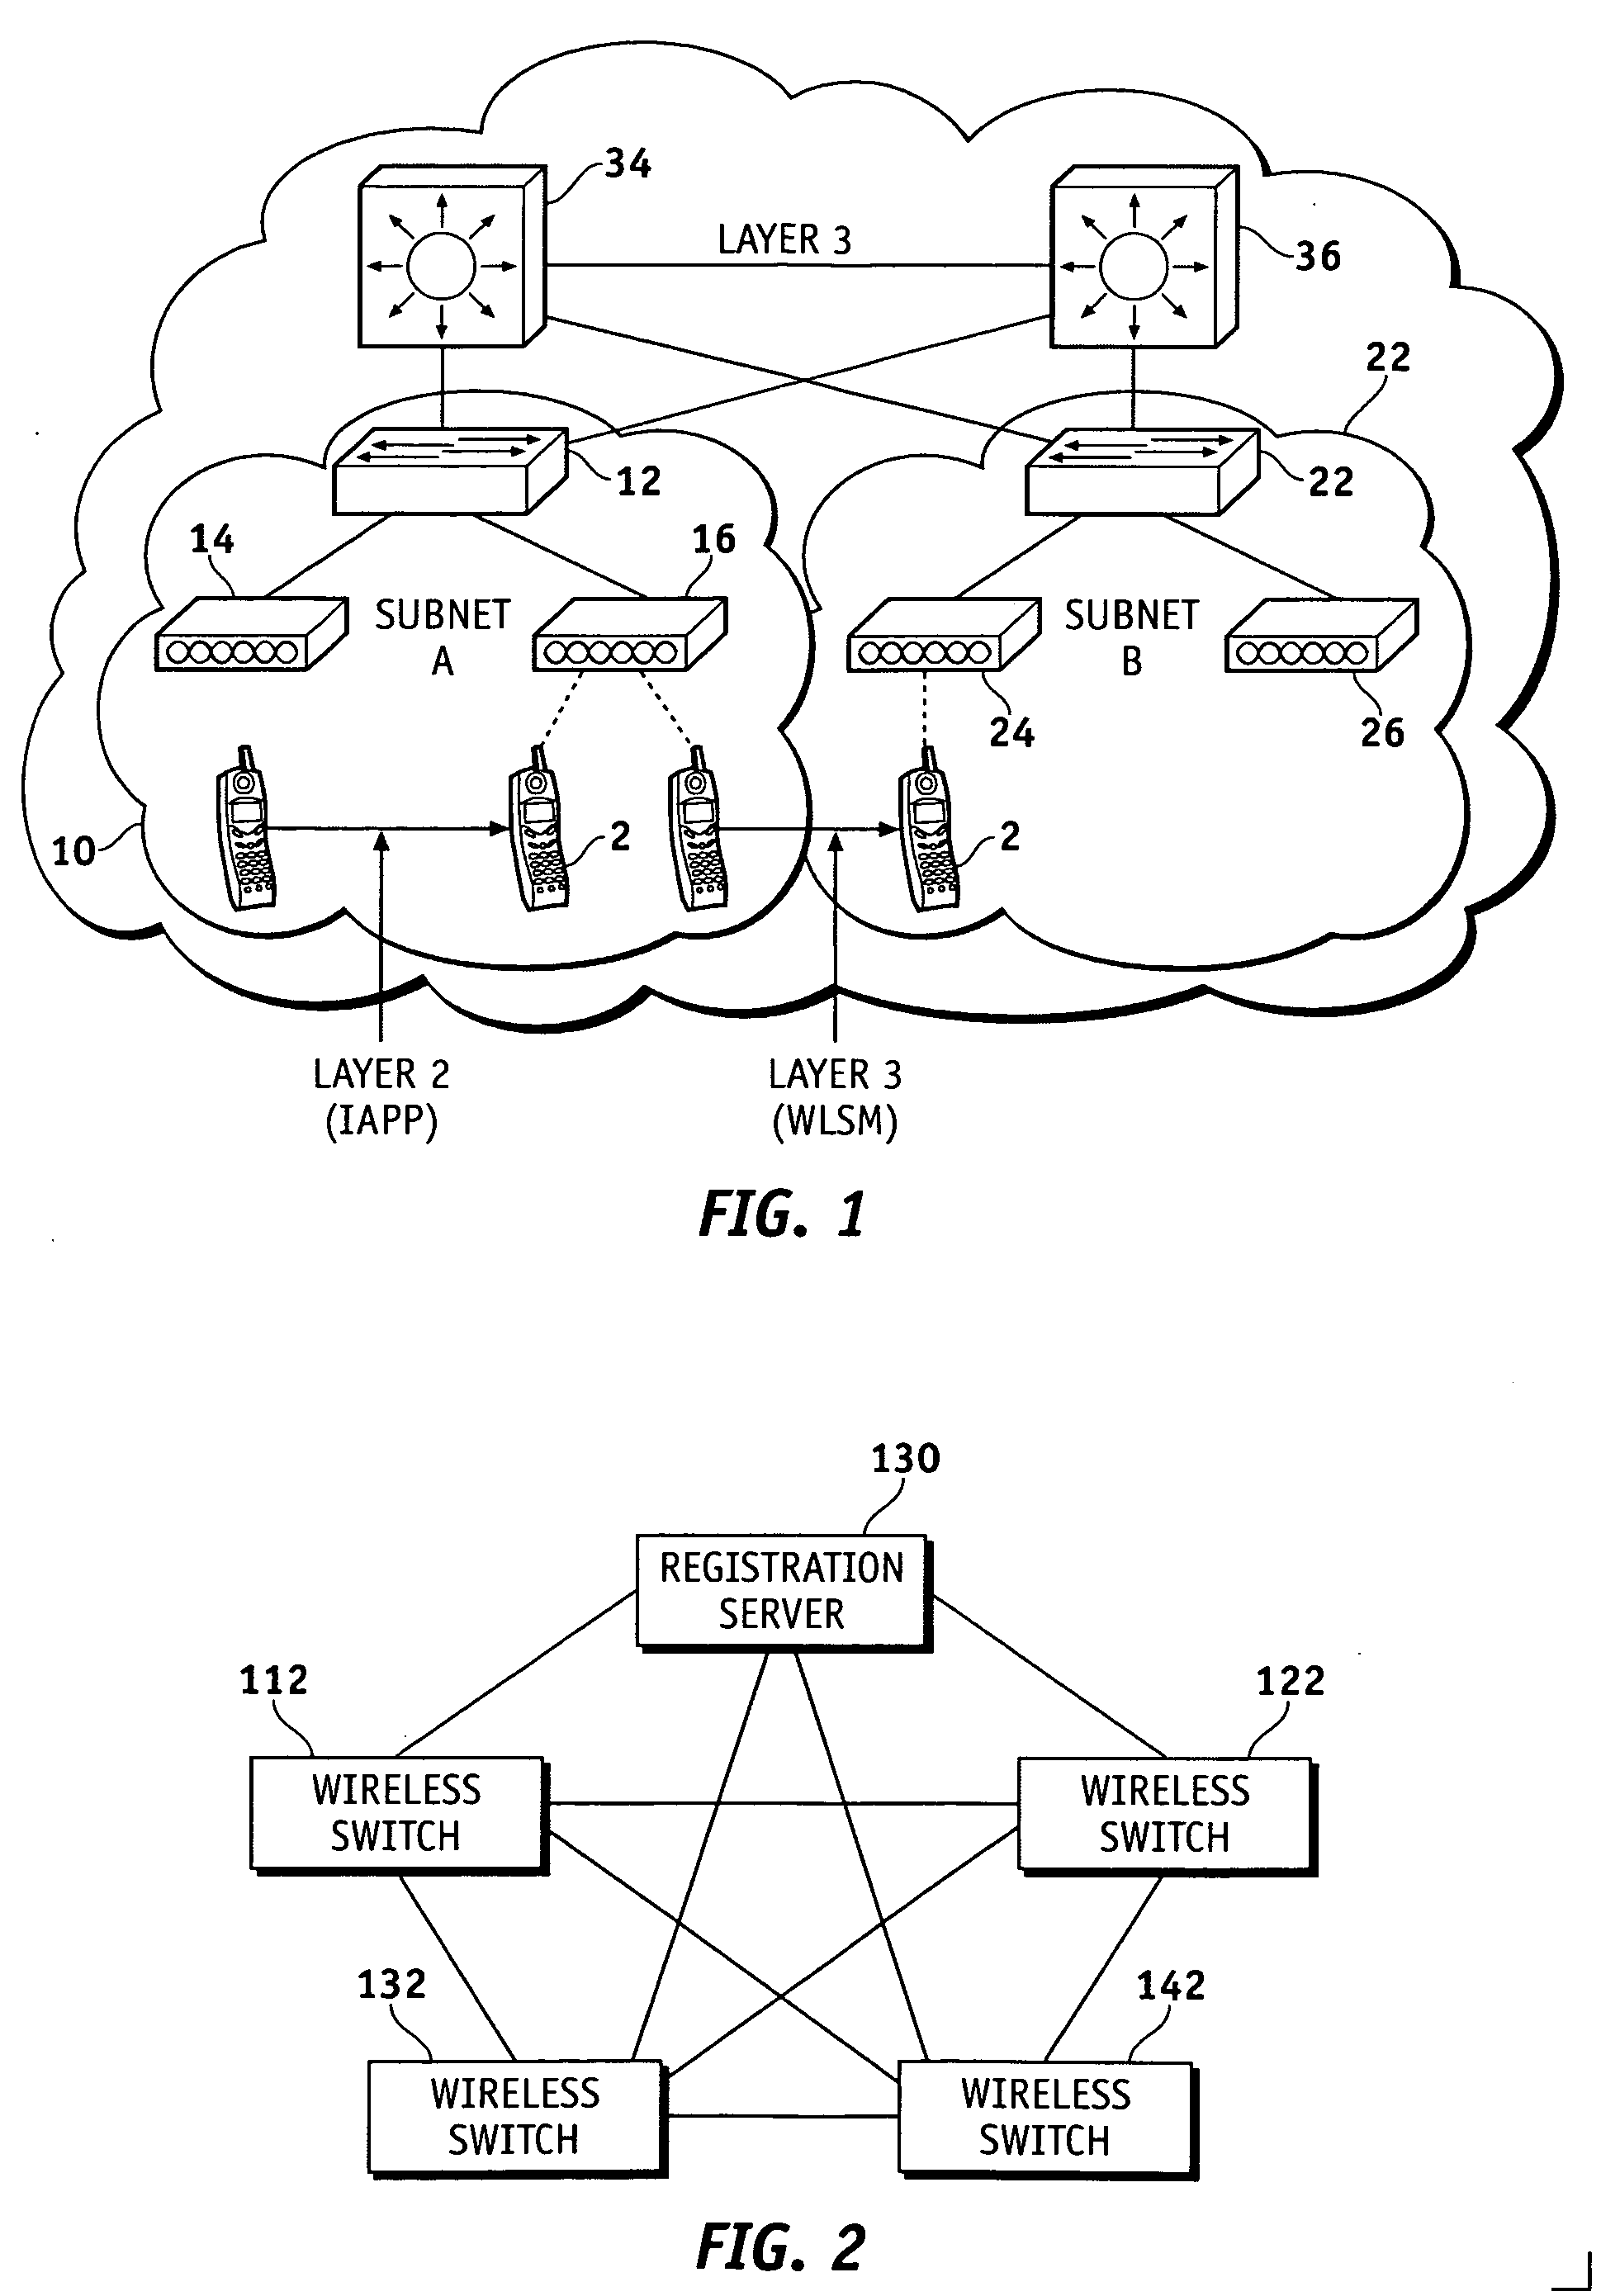 Method, system and apparatus for assigning and managing IP addresses for wireless clients in wireless local area networks (WLANs)